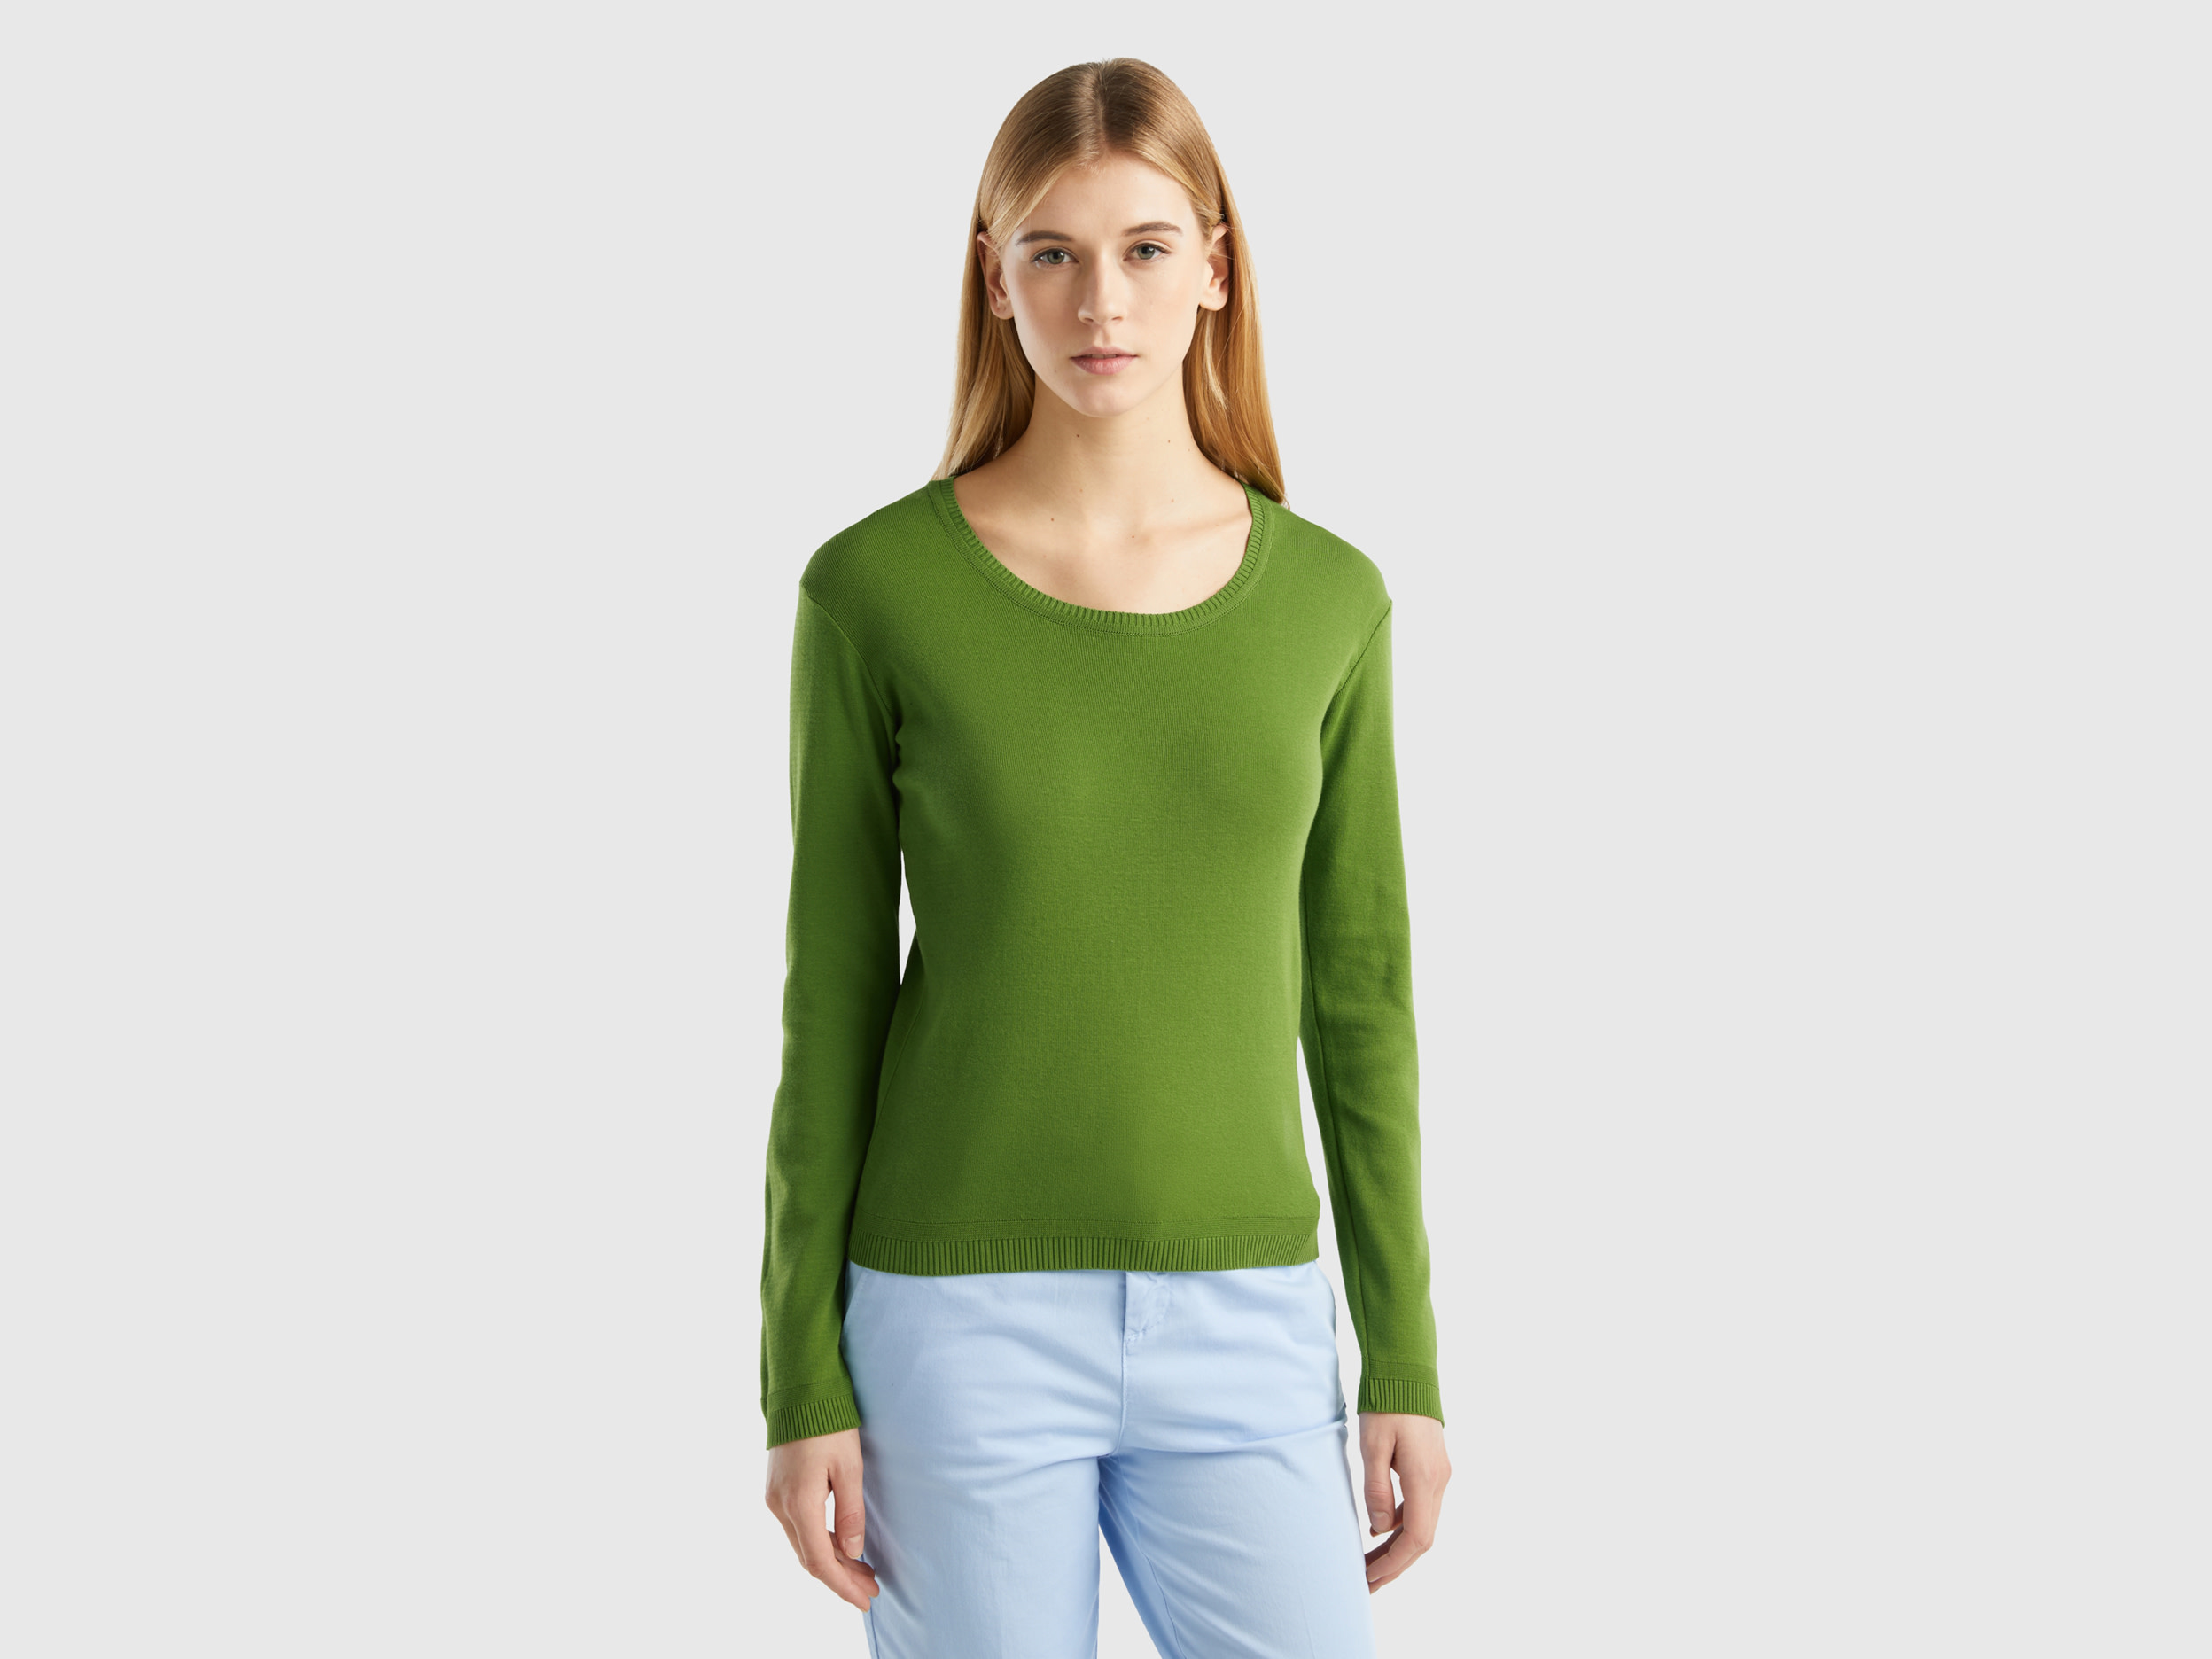 Benetton, Crew Neck Sweater In Pure Cotton, size XL, Military Green, Women